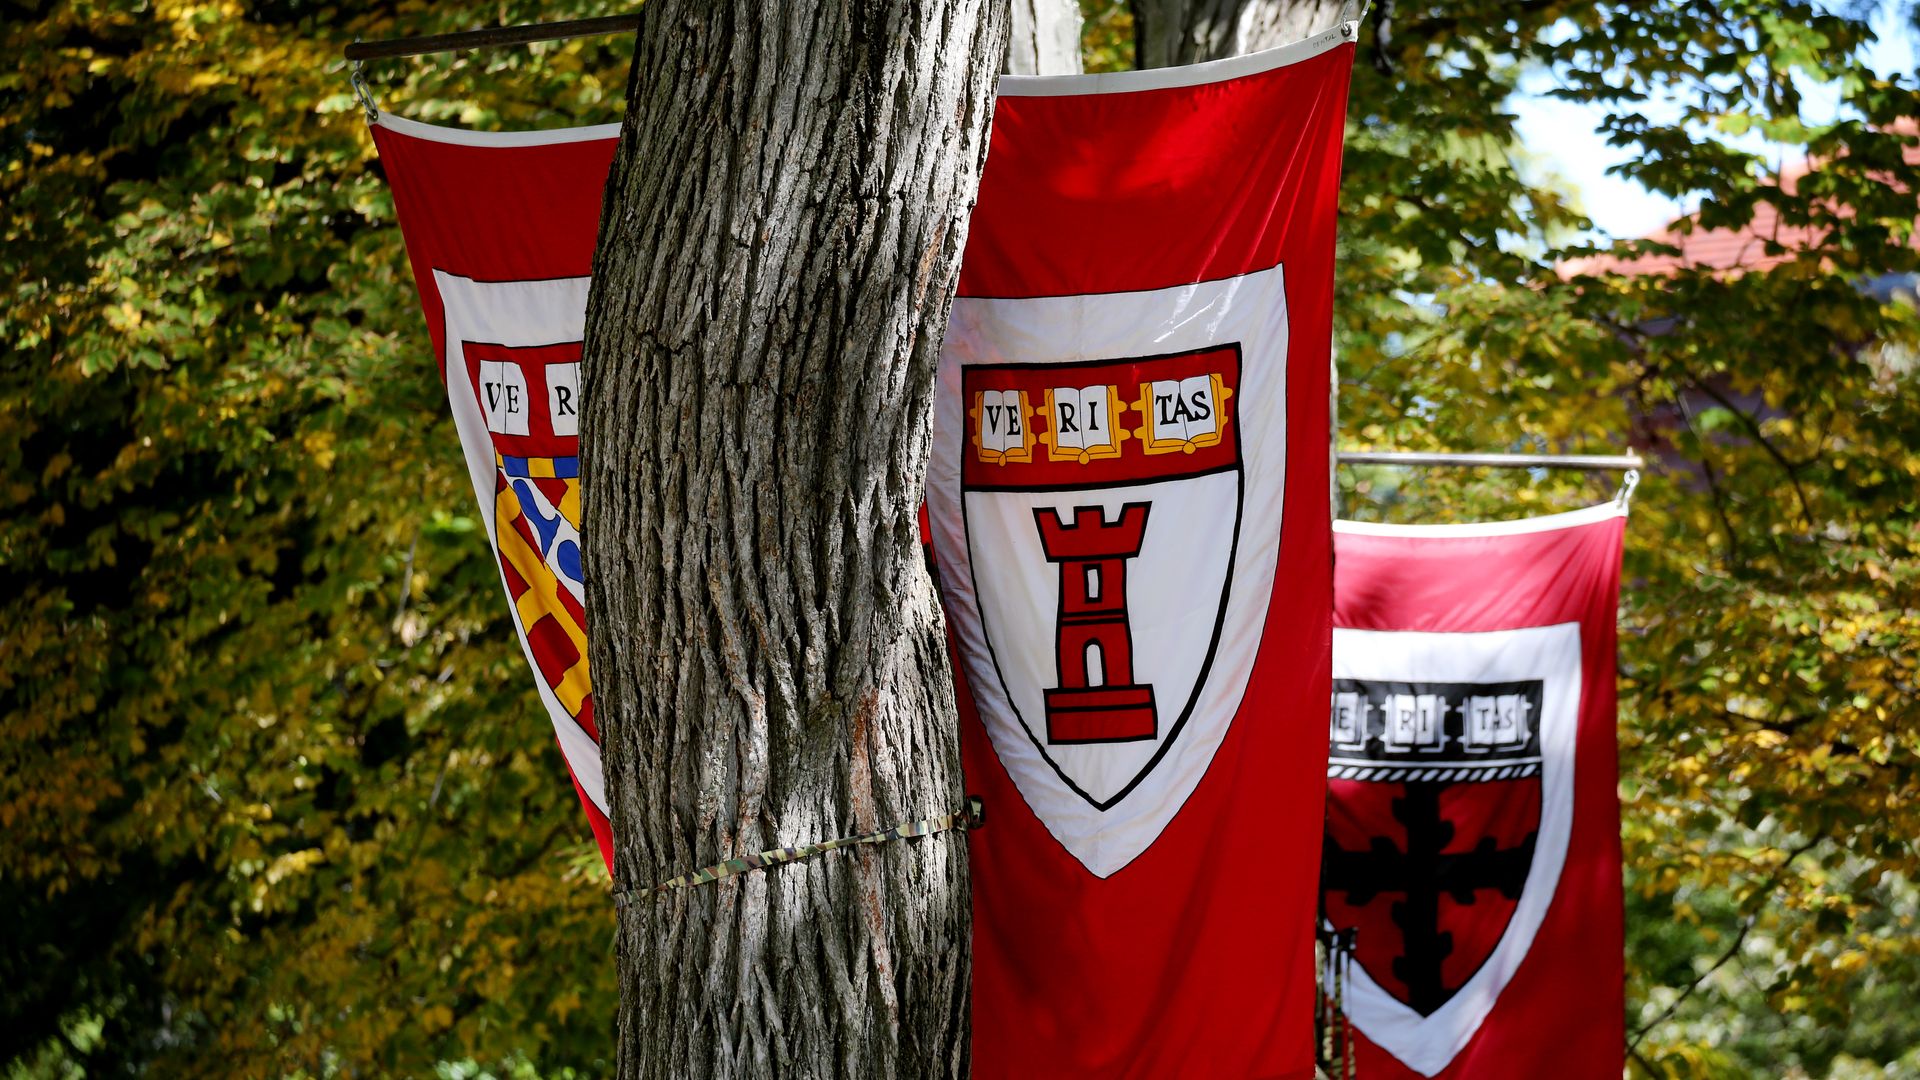 In this image, three flags are attached to a tree on Harvard's campus